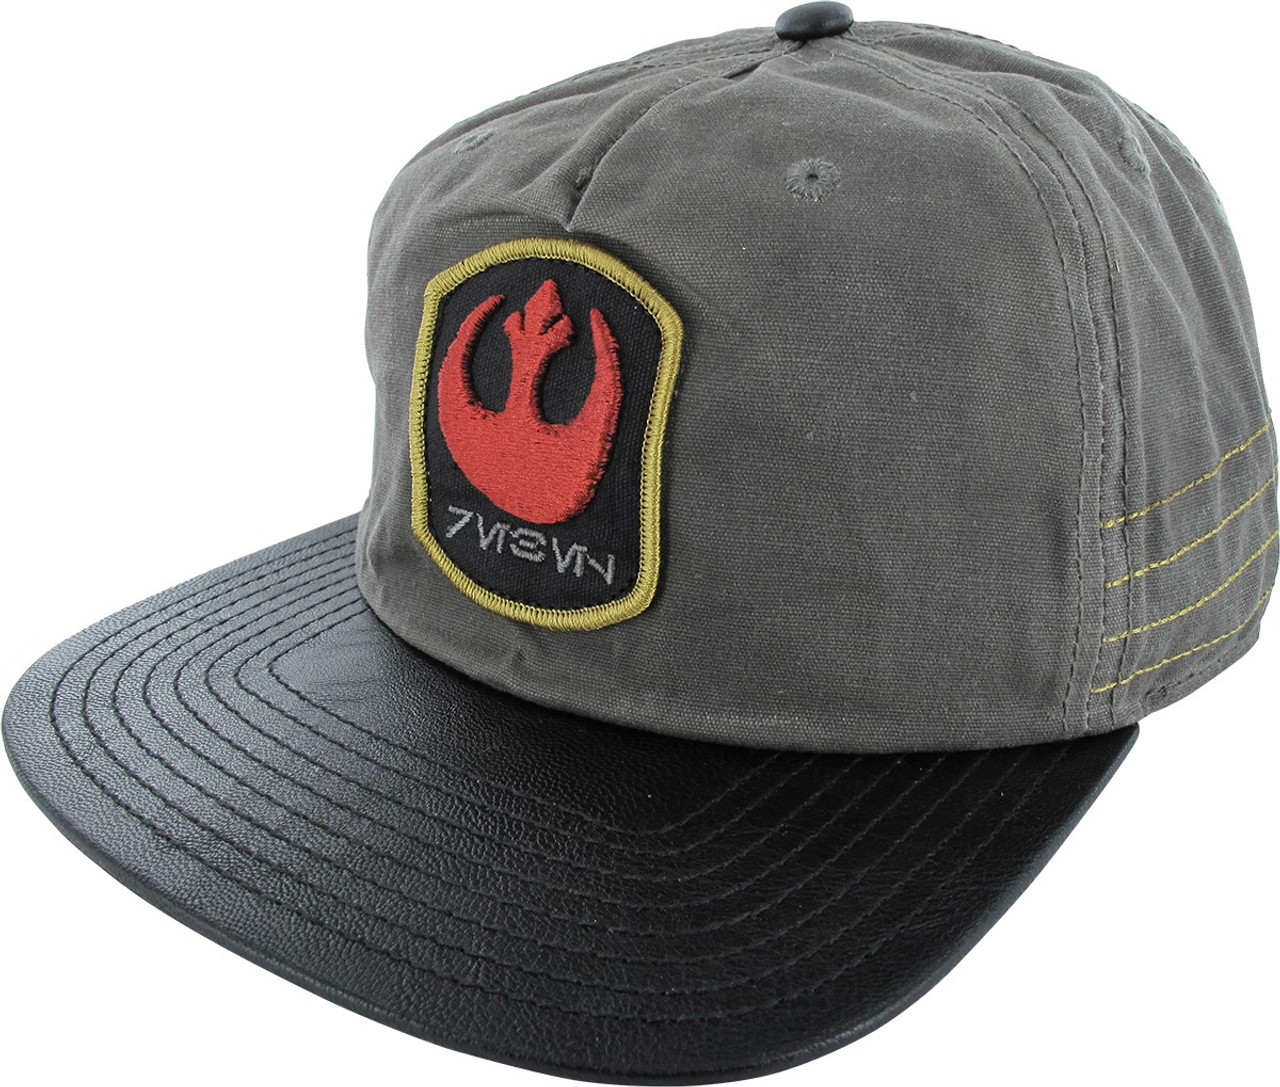 Star Wars Rogue One Rebel Slouch Snapback Hat